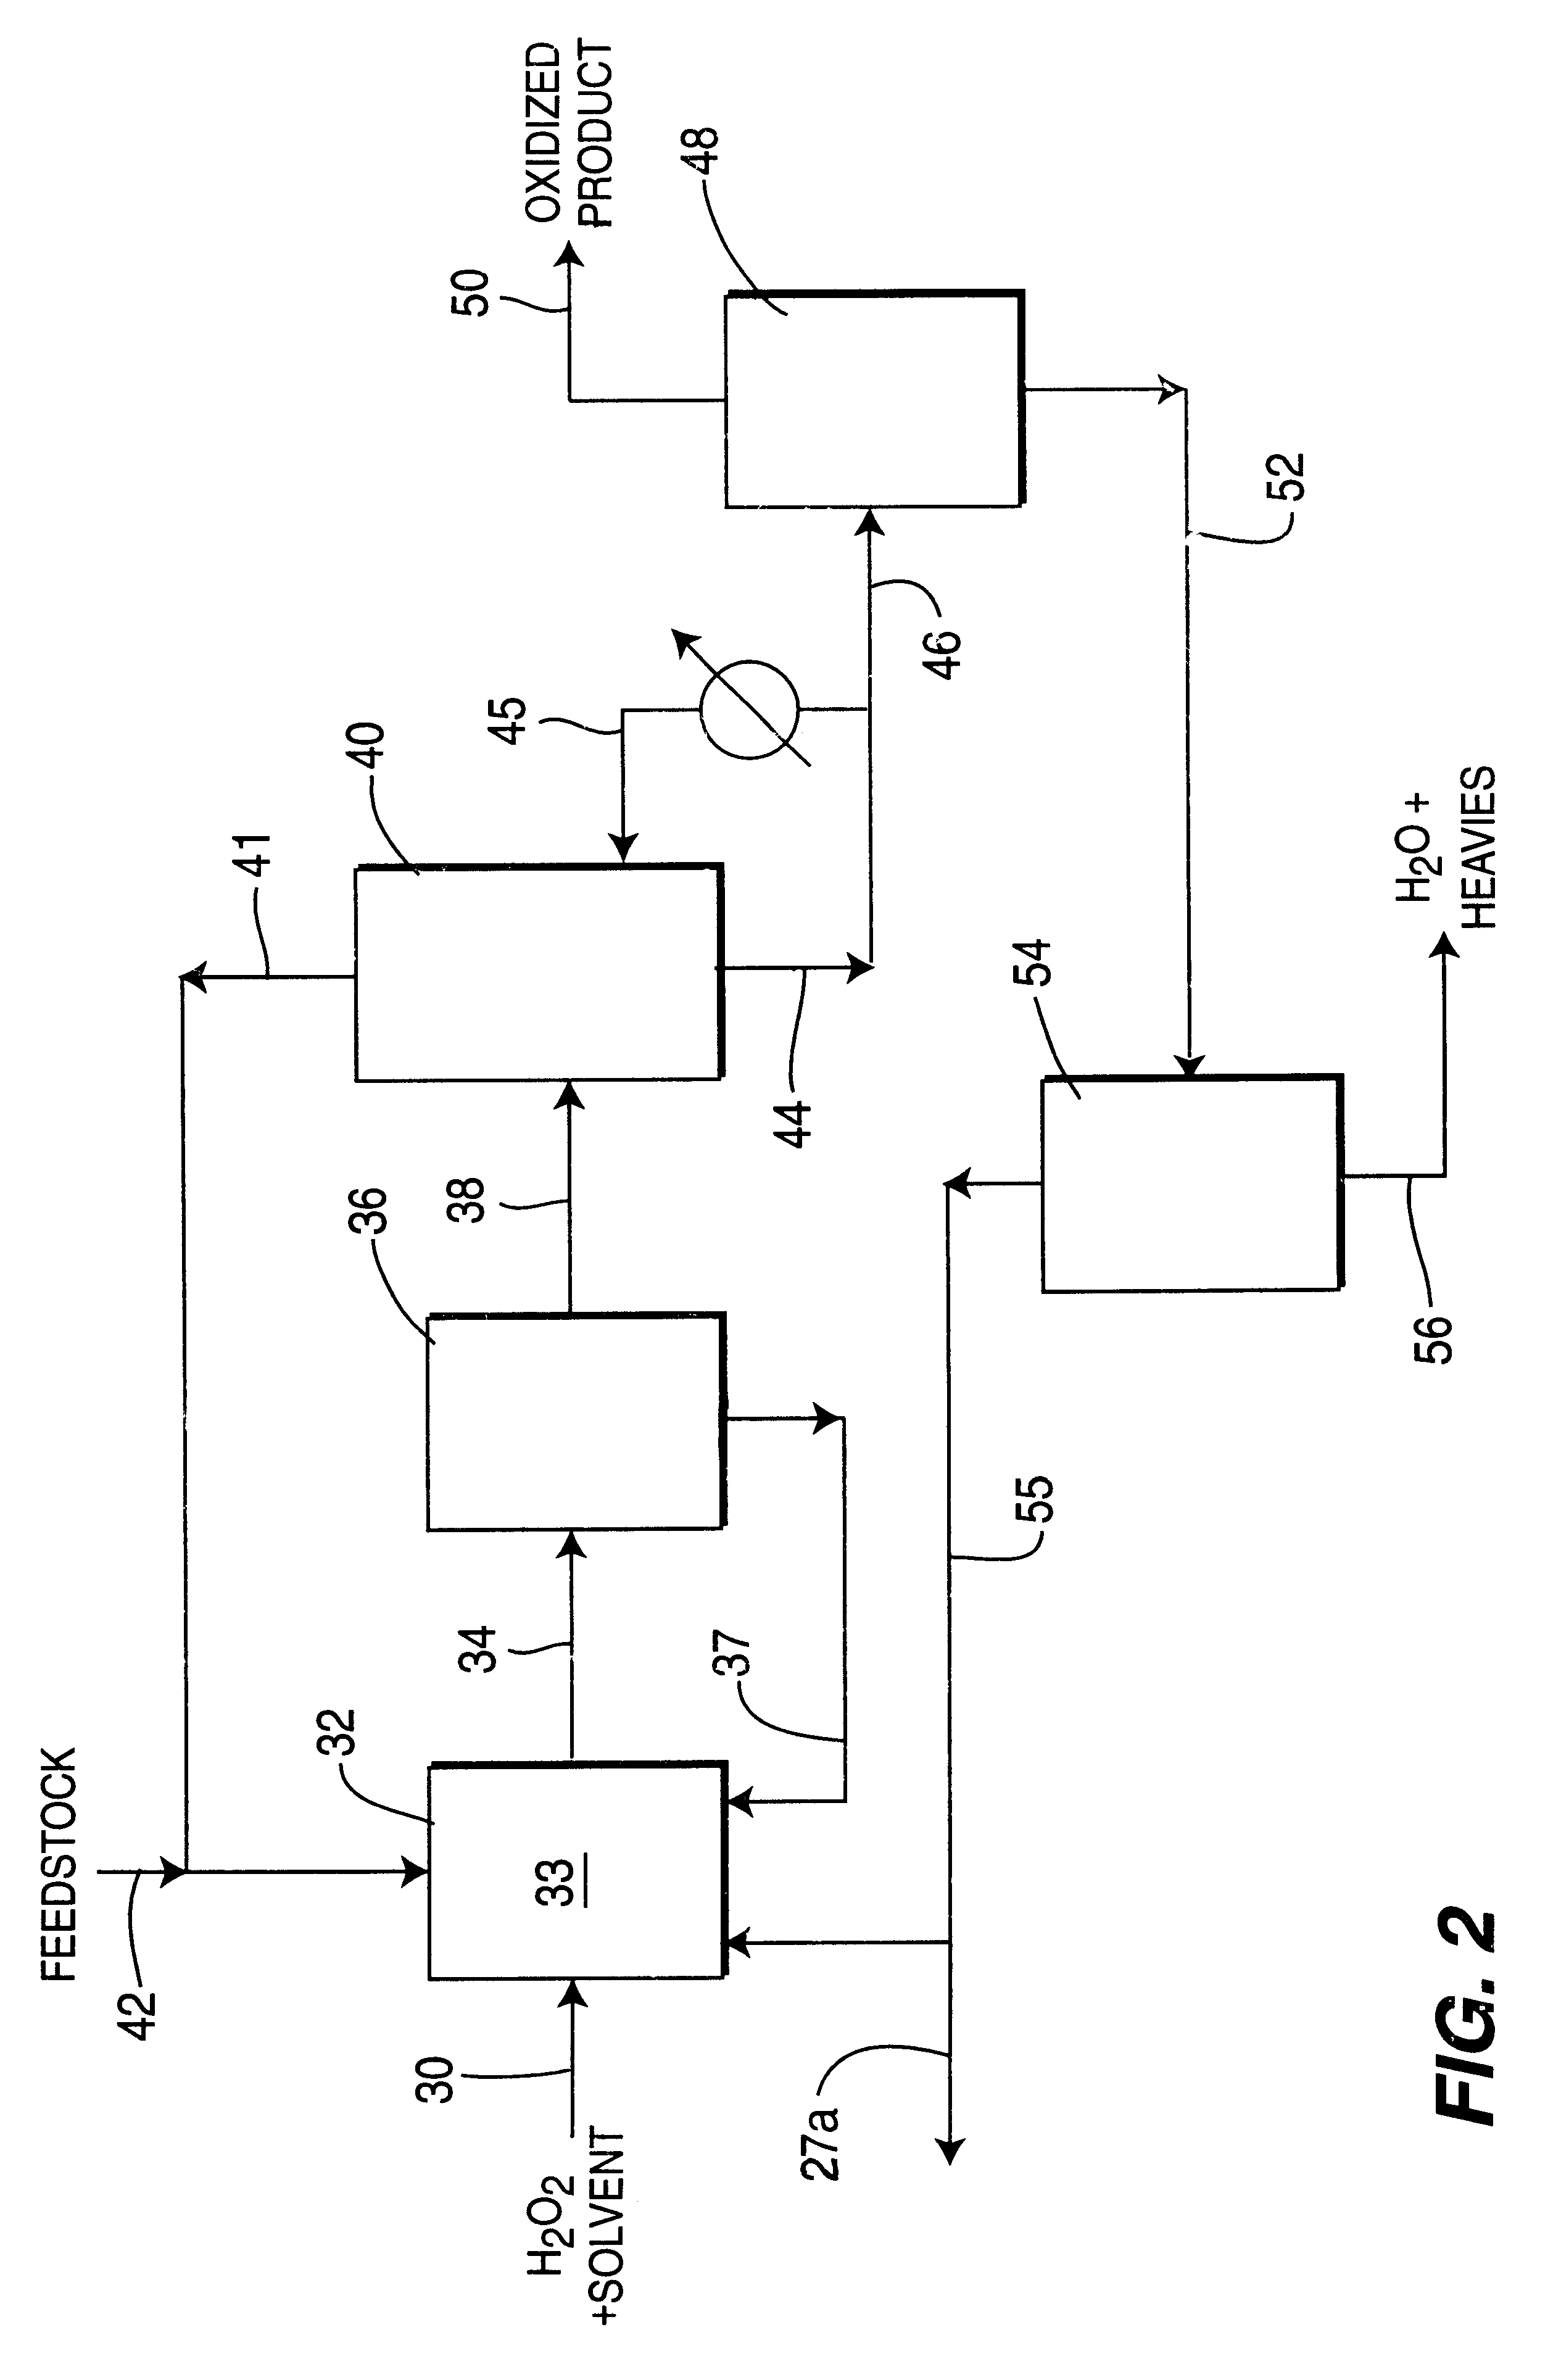 Process for selective oxidation of organic feedstocks with hydrogen peroxide